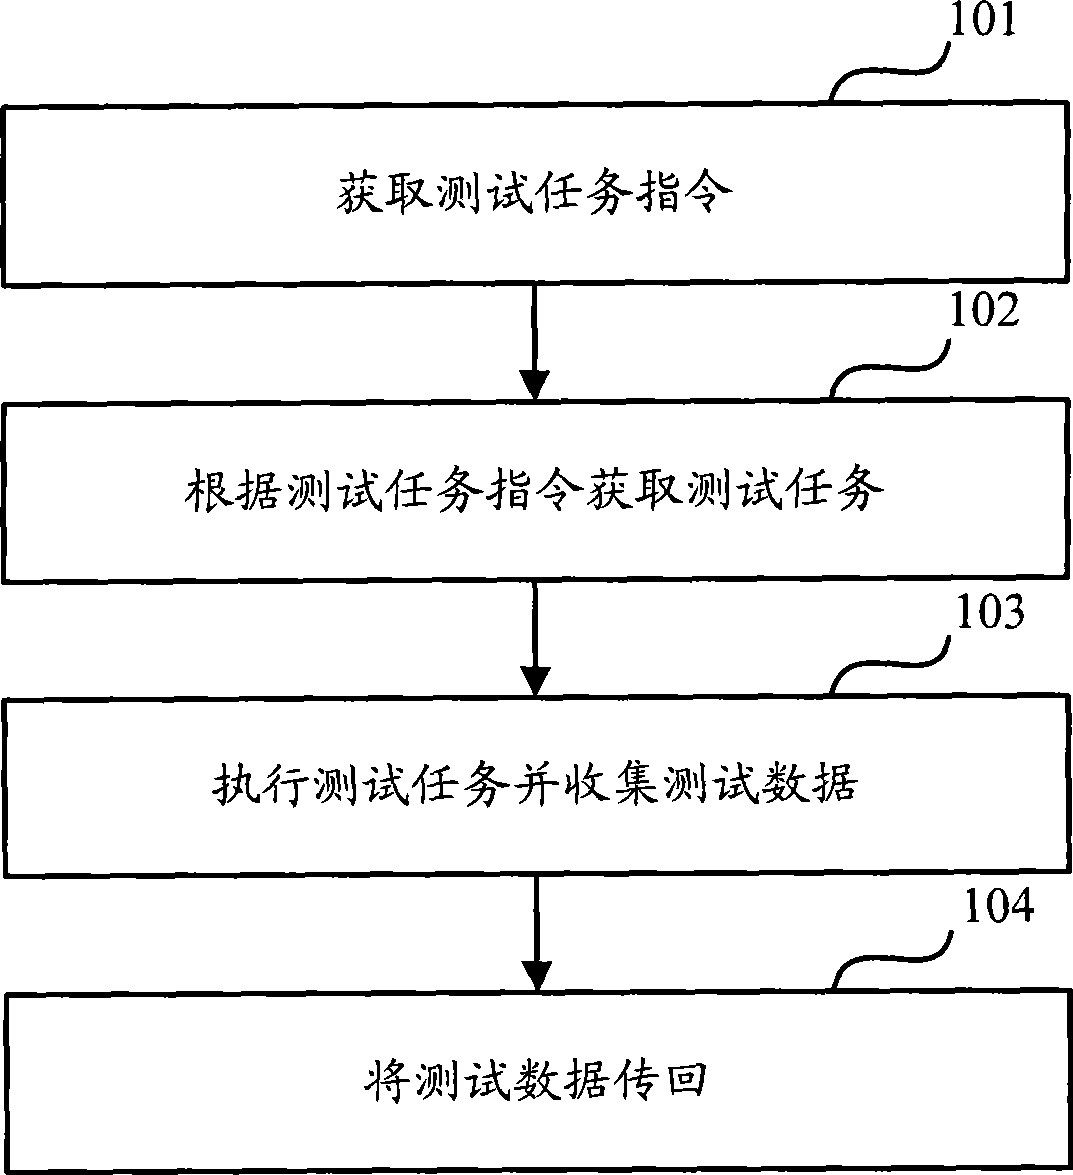 Method and apparatus for detecting wireless communication network